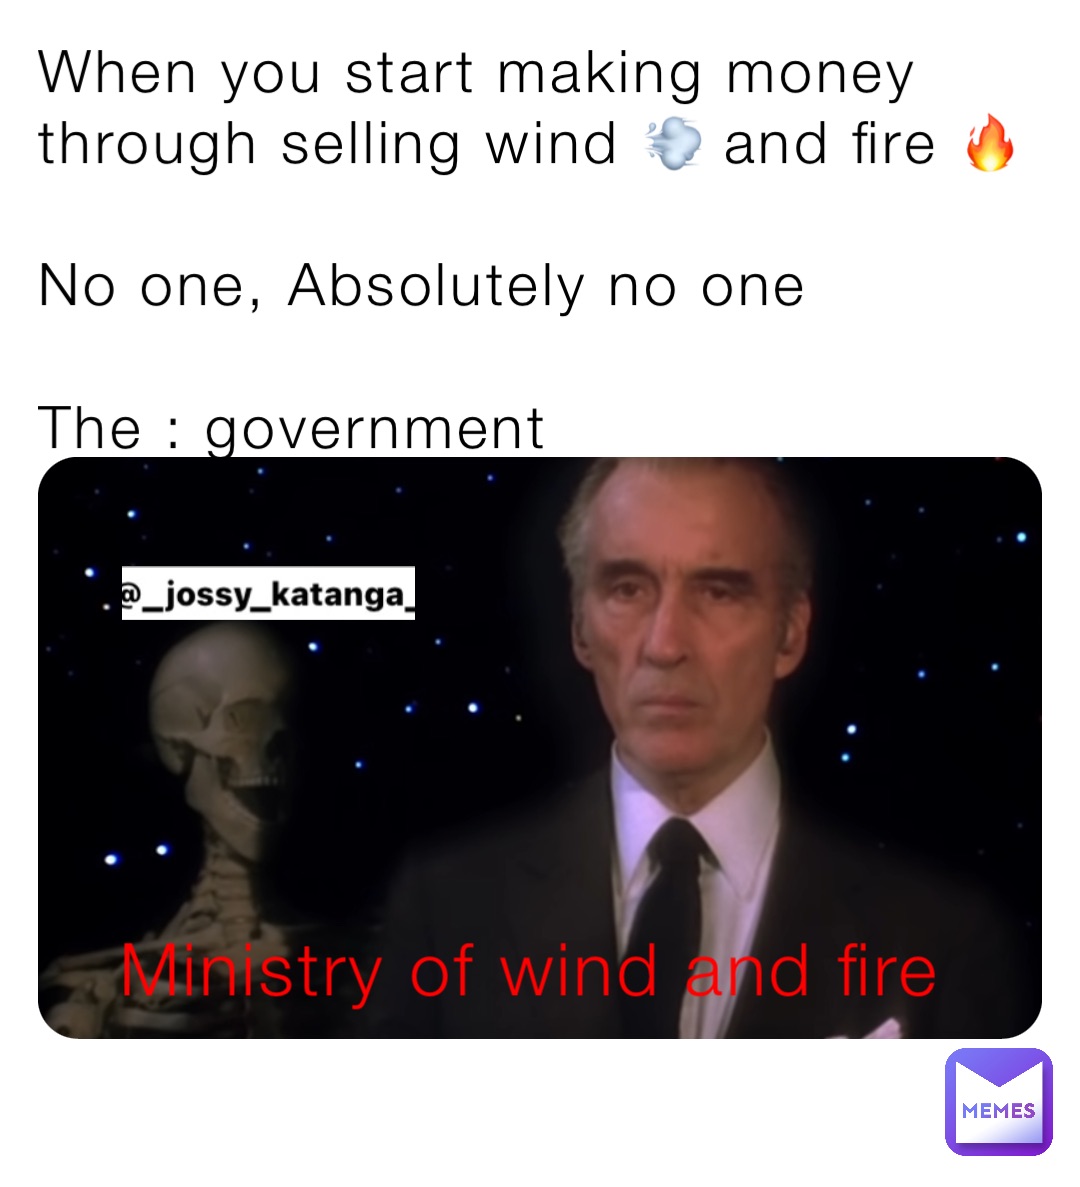 When you start making money through selling wind 💨 and fire 🔥

No one, Absolutely no one 

The : government Ministry of wind and fire